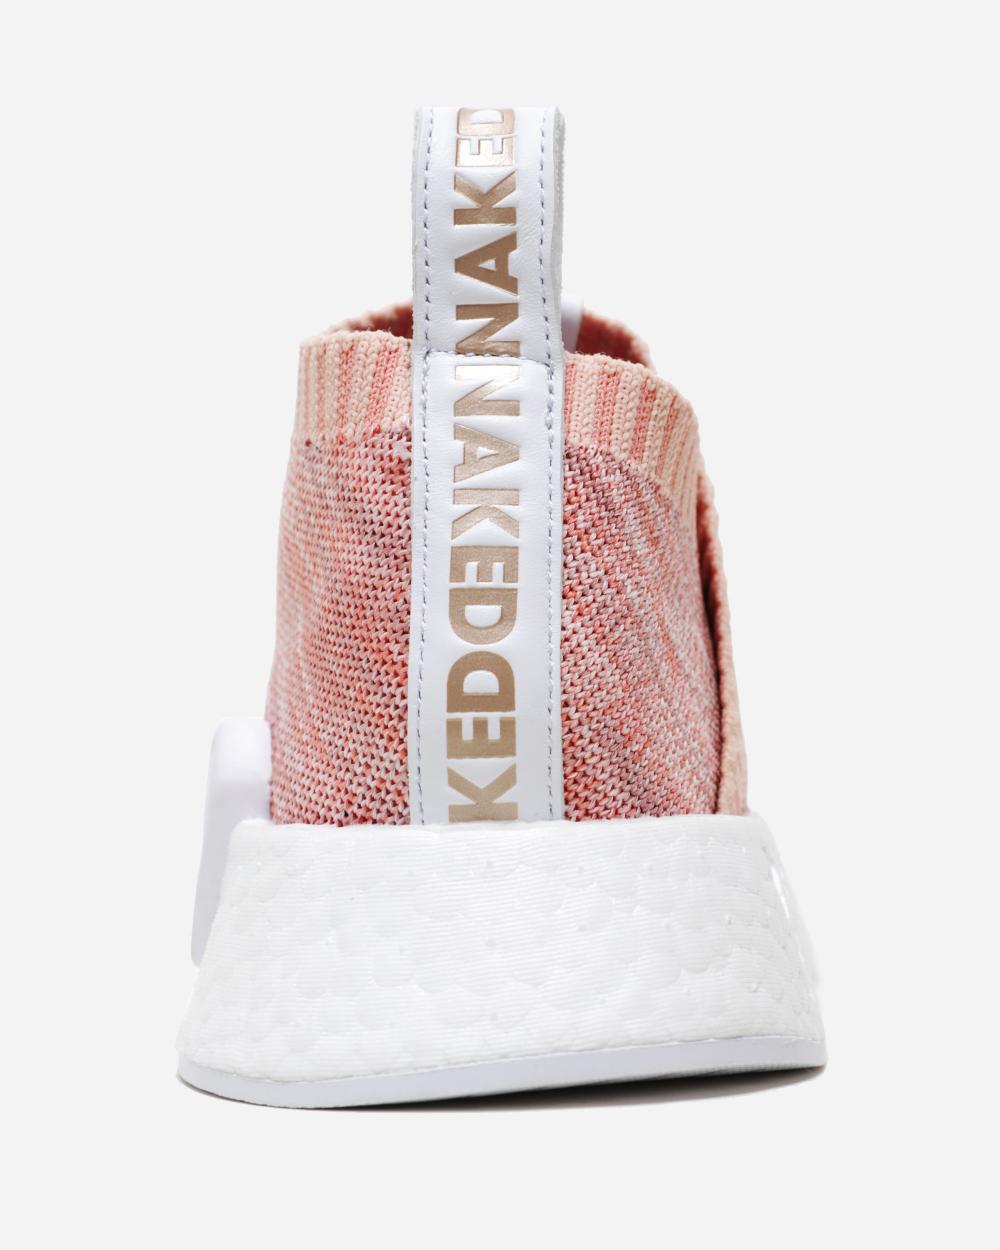 KITH x NAKED x adidas Consortium NMD CS2 BY2597 Pink 2